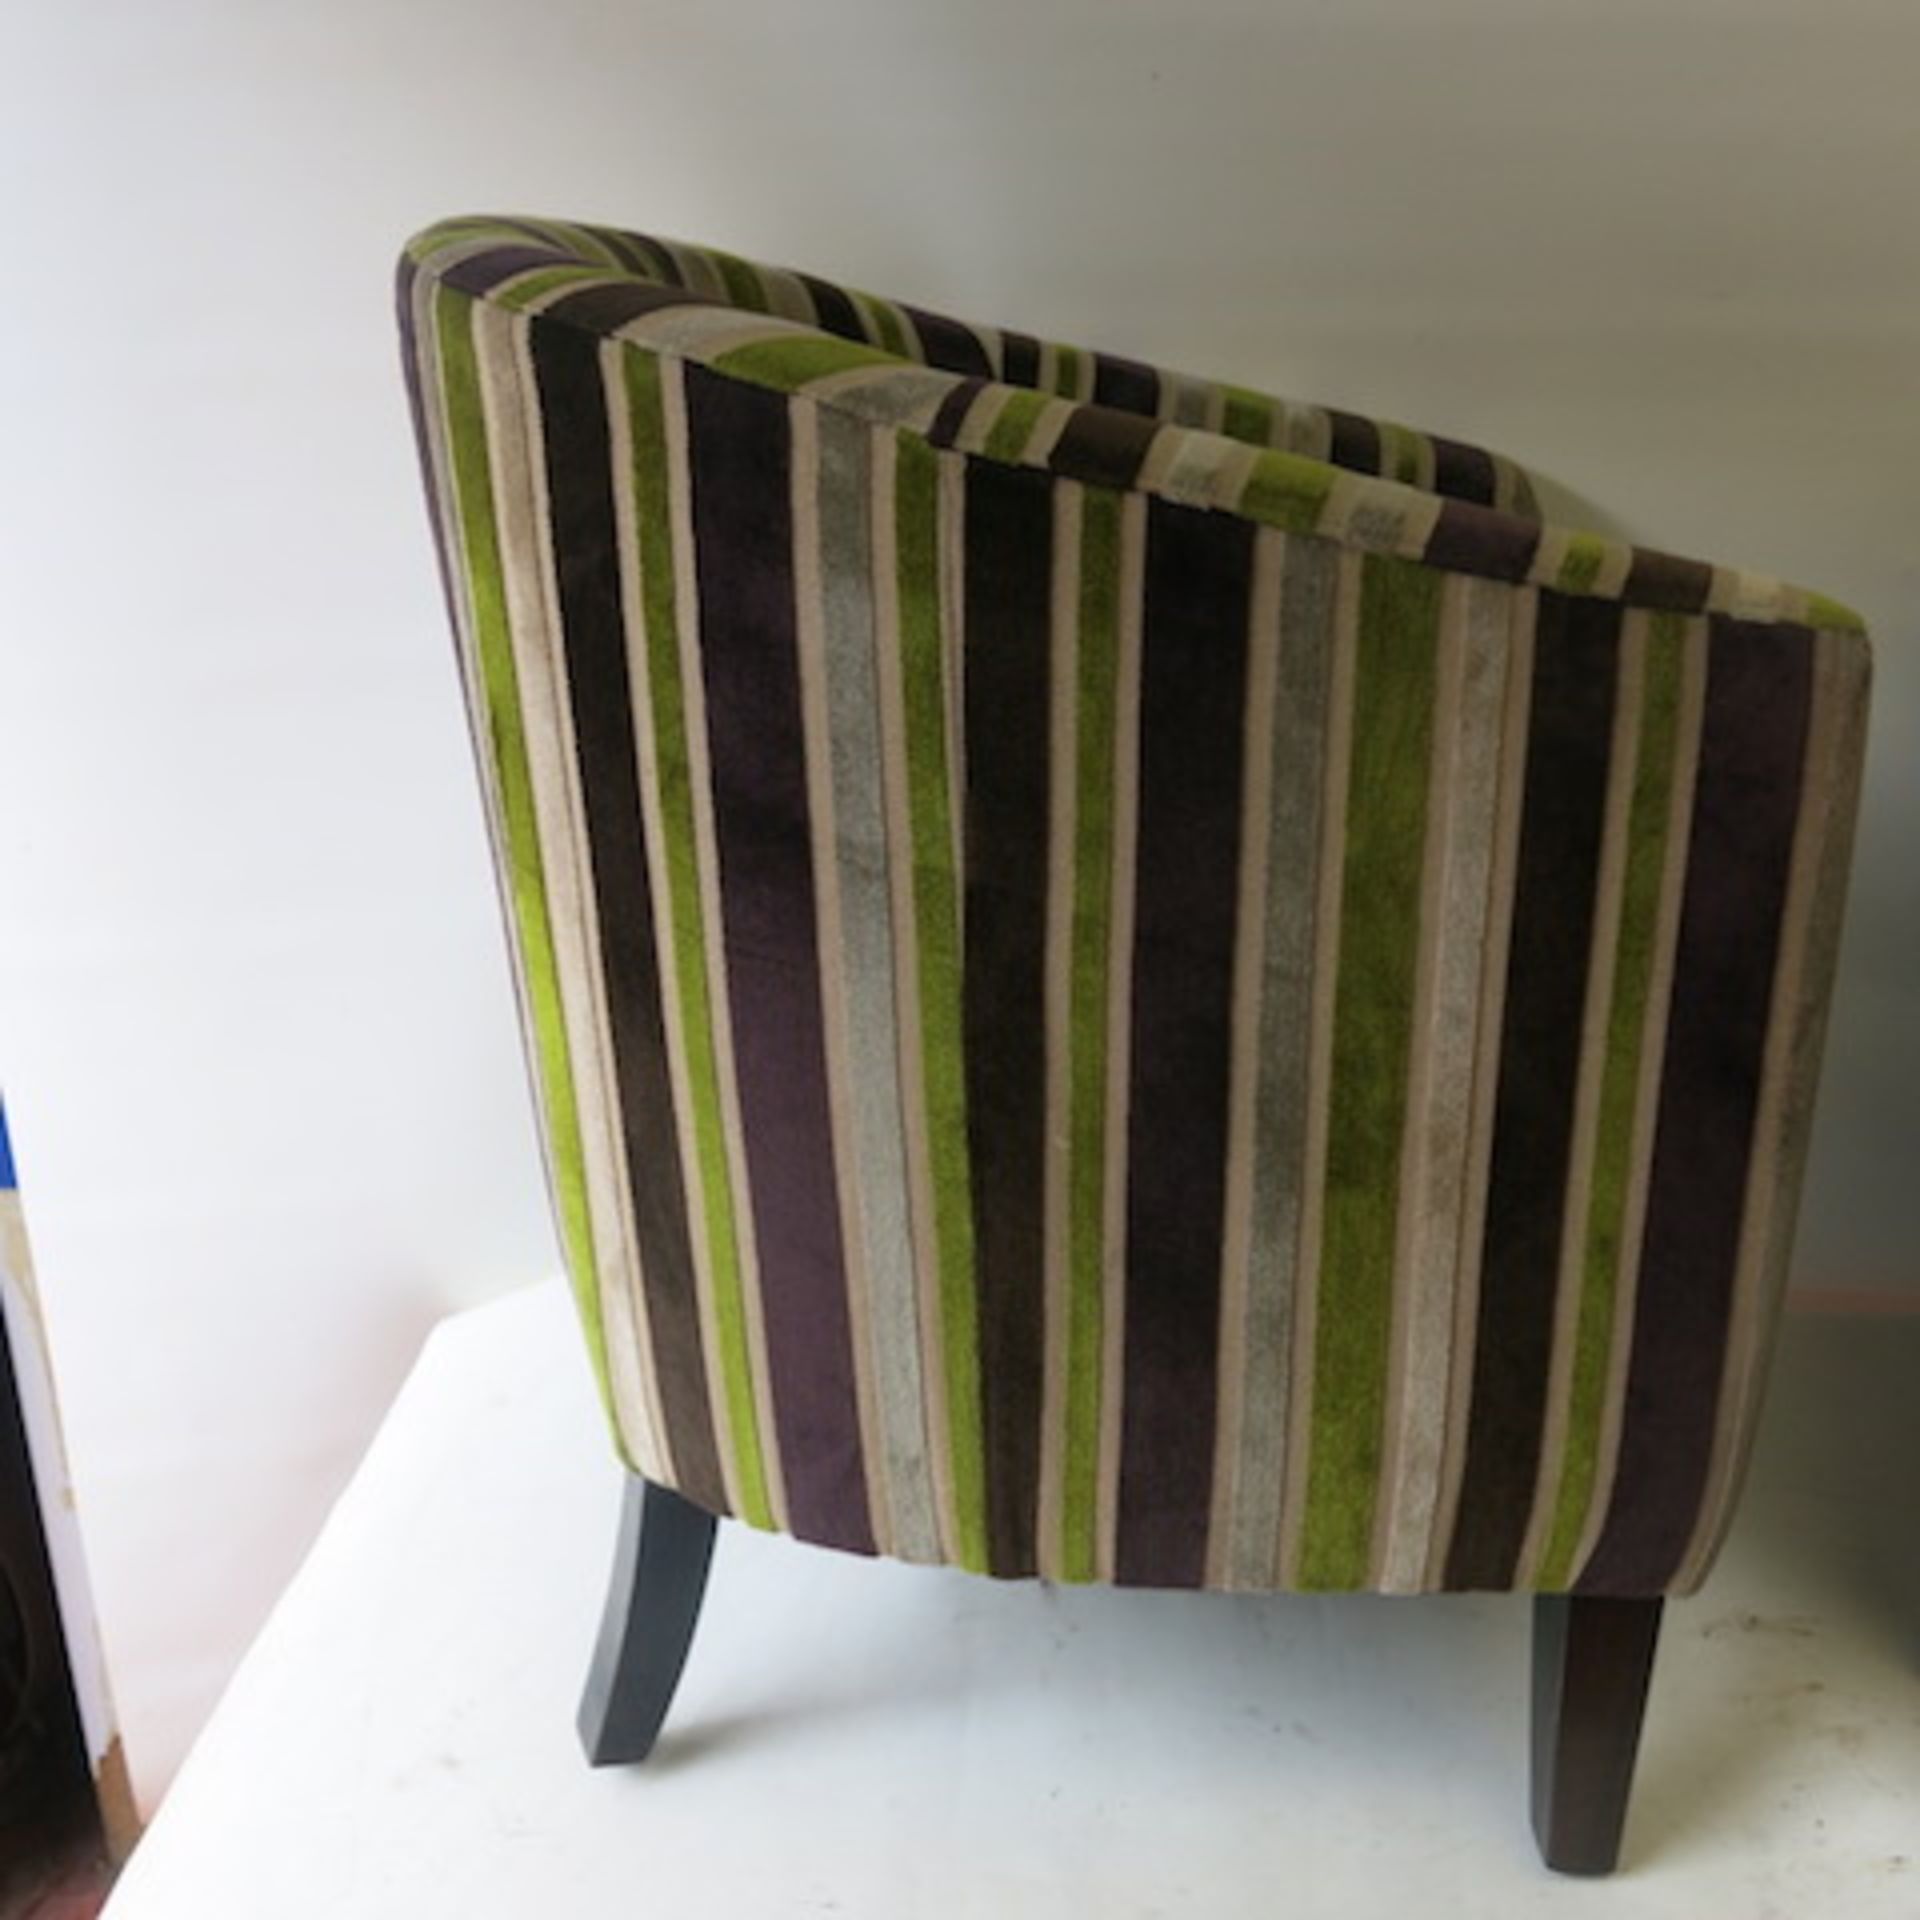 2 x Matching Crushed Velour Tub Chairs with Faux Leather Seat, in Striped Lime/Purple & Beige - Image 5 of 6